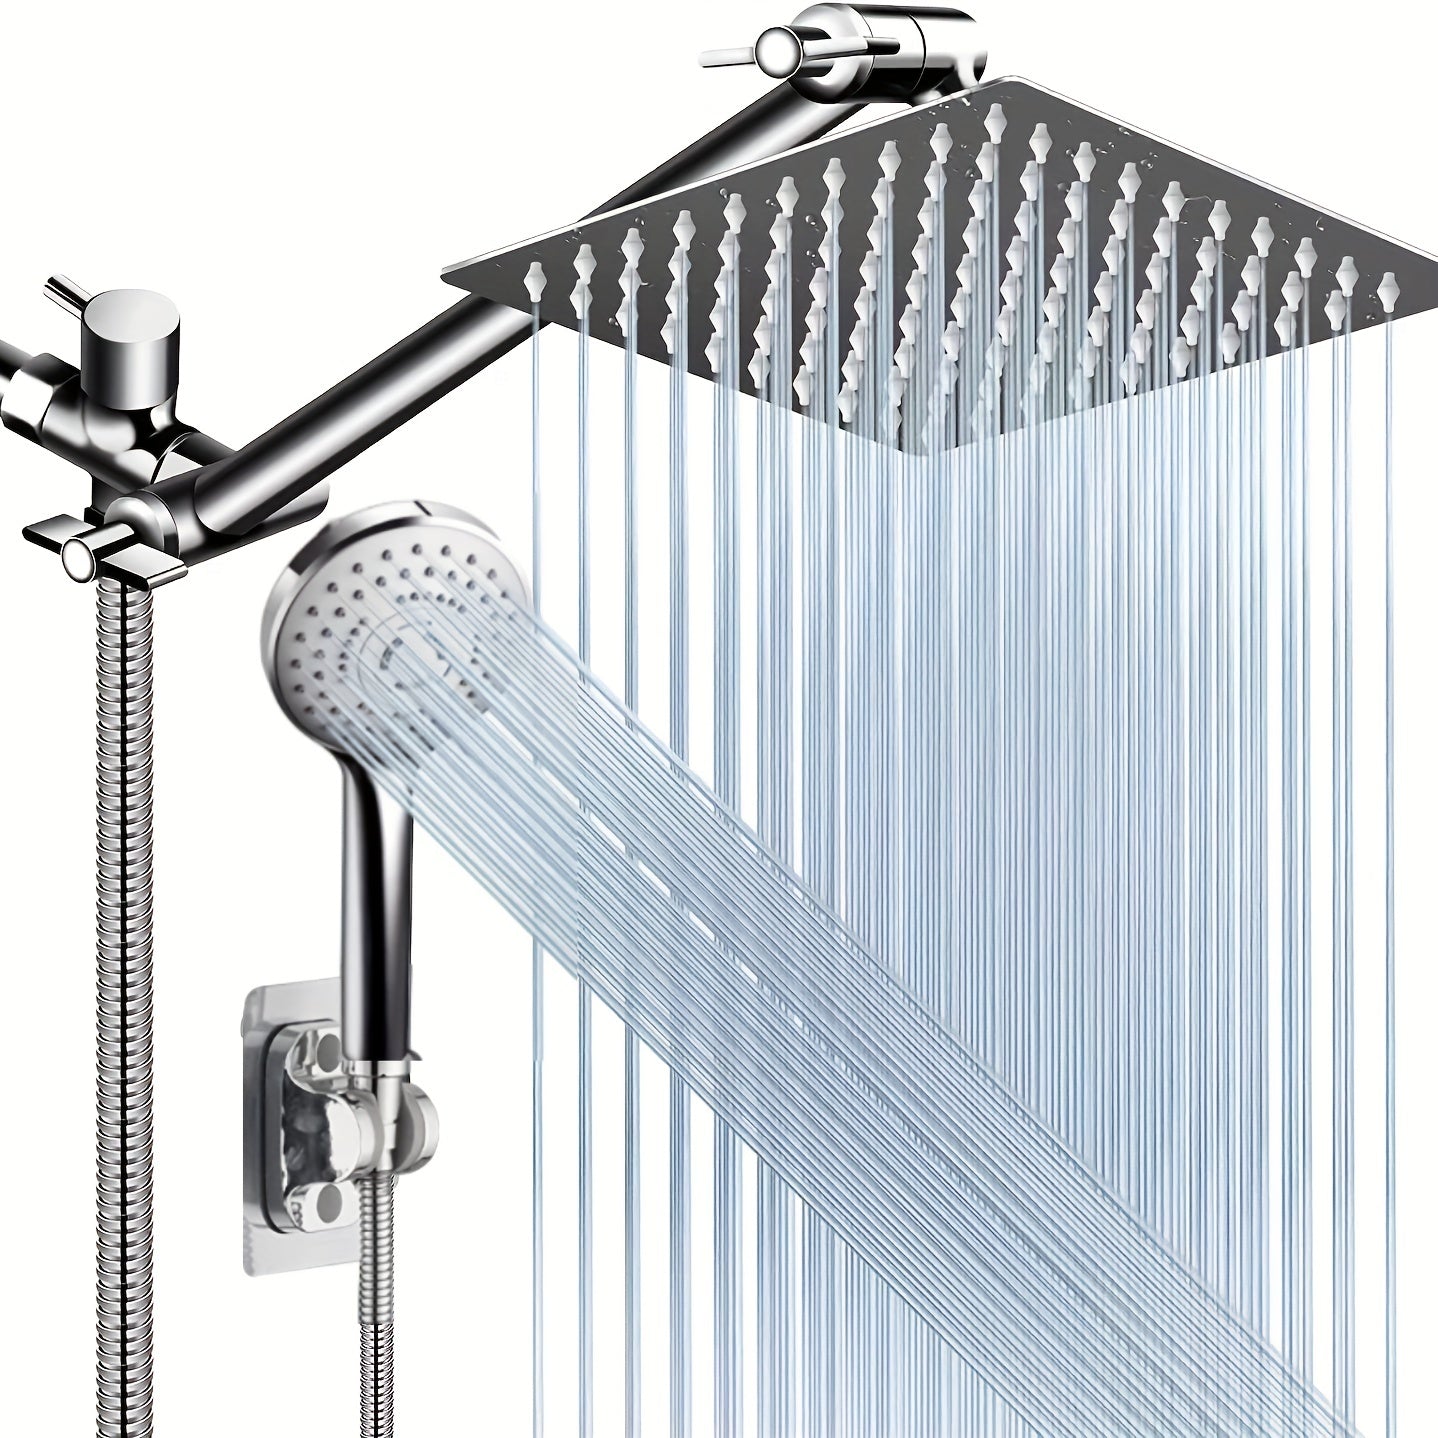 1set Shower Head With Handheld, High Pressure Rain Shower Head With 11 Inch Extension Arm, 5-mode Adjustable Leak Proof Shower Head With Bracket/hose, Height/Angle Adjustable ➡ BF-00003